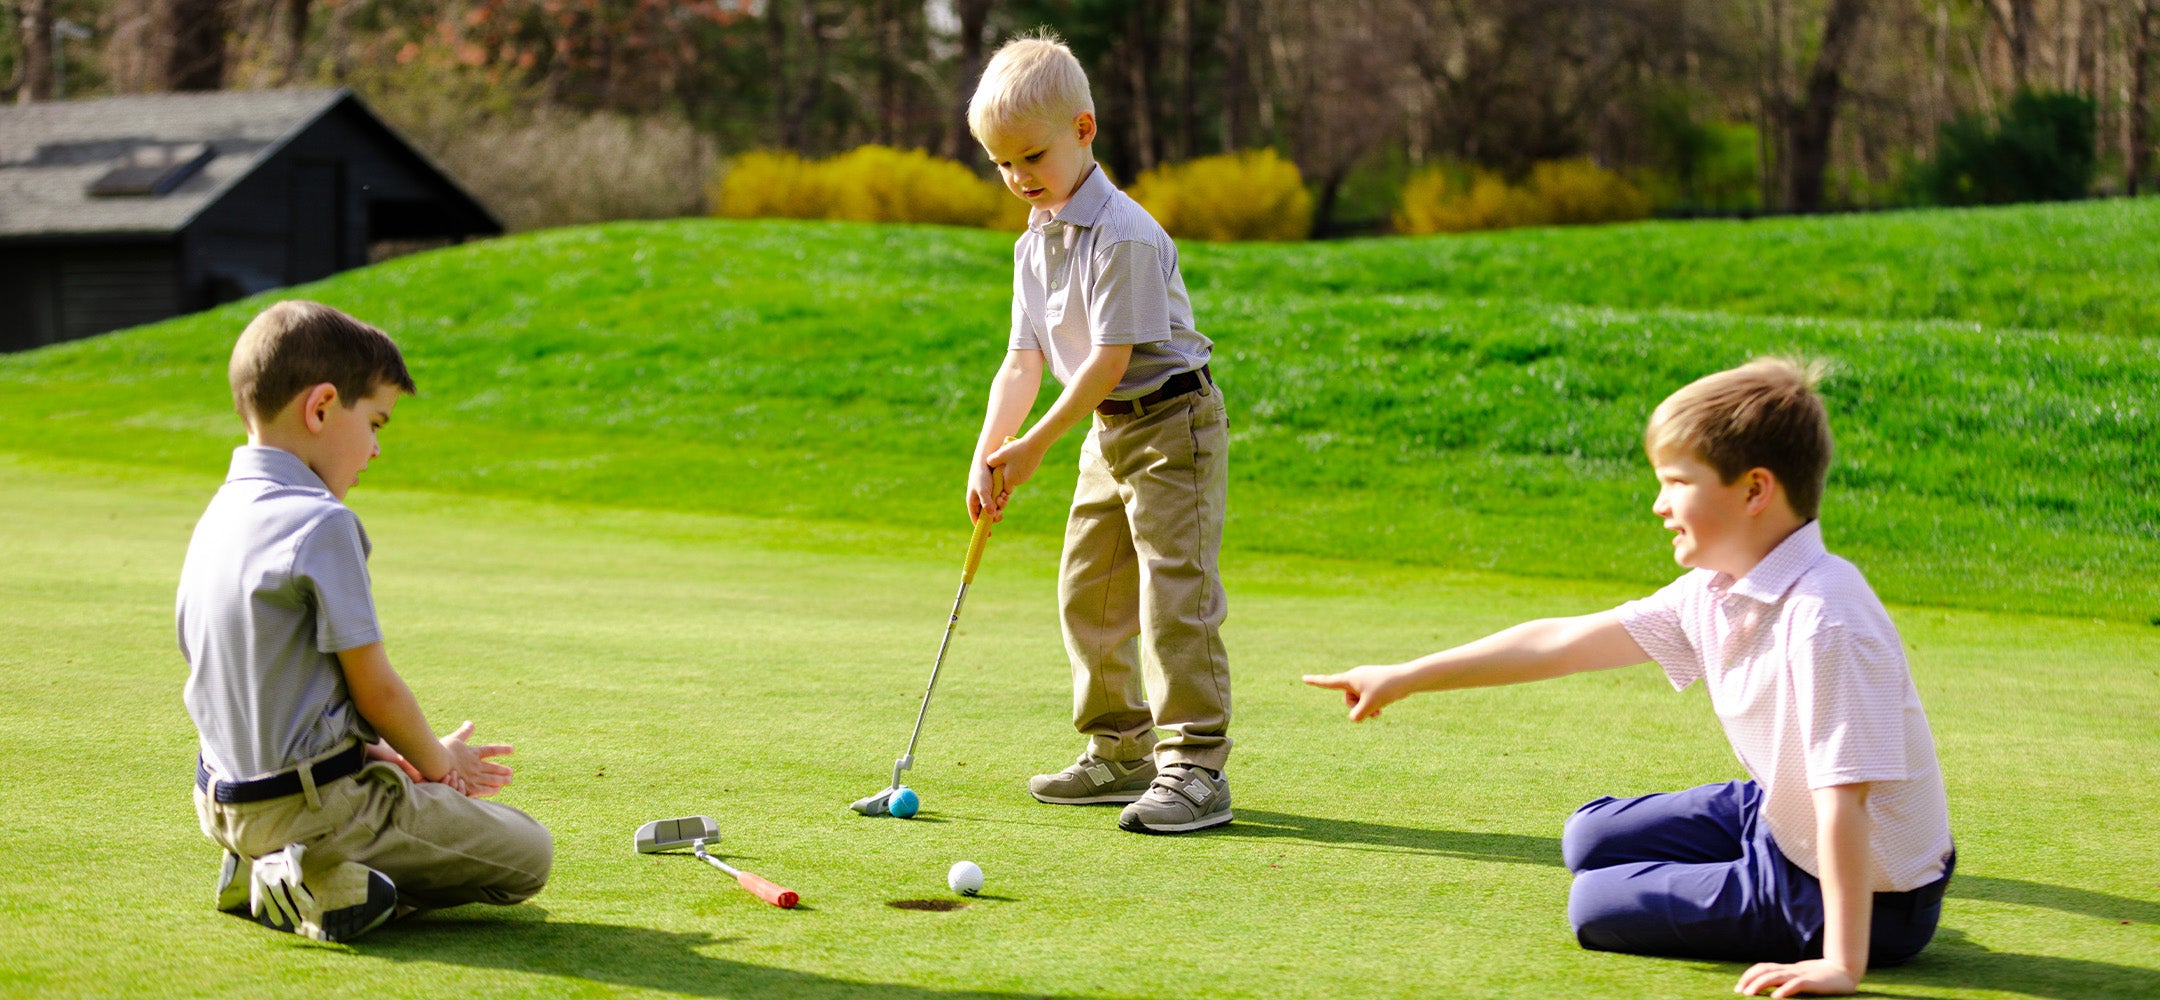 Boys wearing golf clothes playing